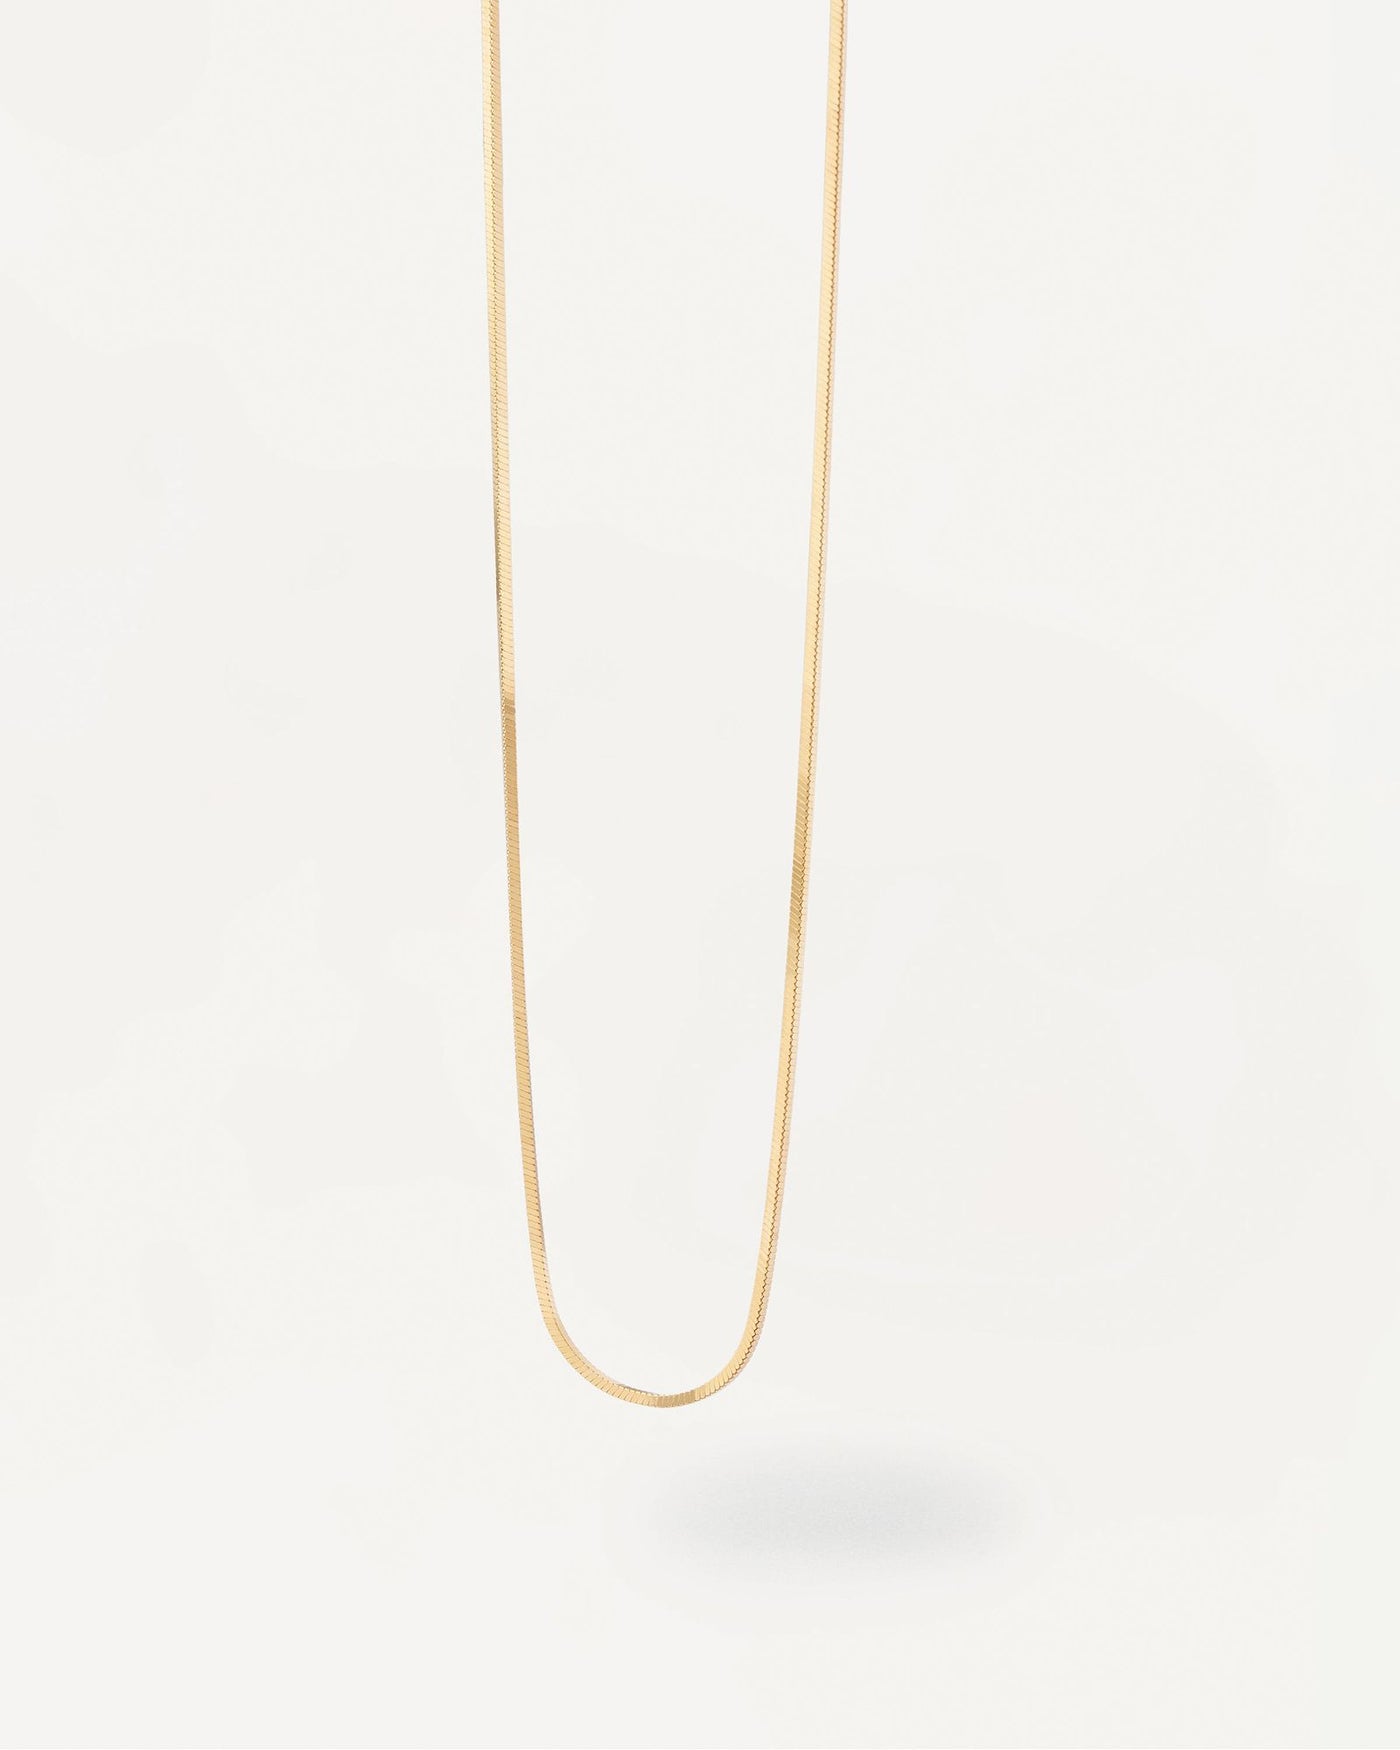 2024 Selection | Snake Necklace. Snake chain necklace in gold-plated silver. Get the latest arrival from PDPAOLA. Place your order safely and get this Best Seller. Free Shipping.